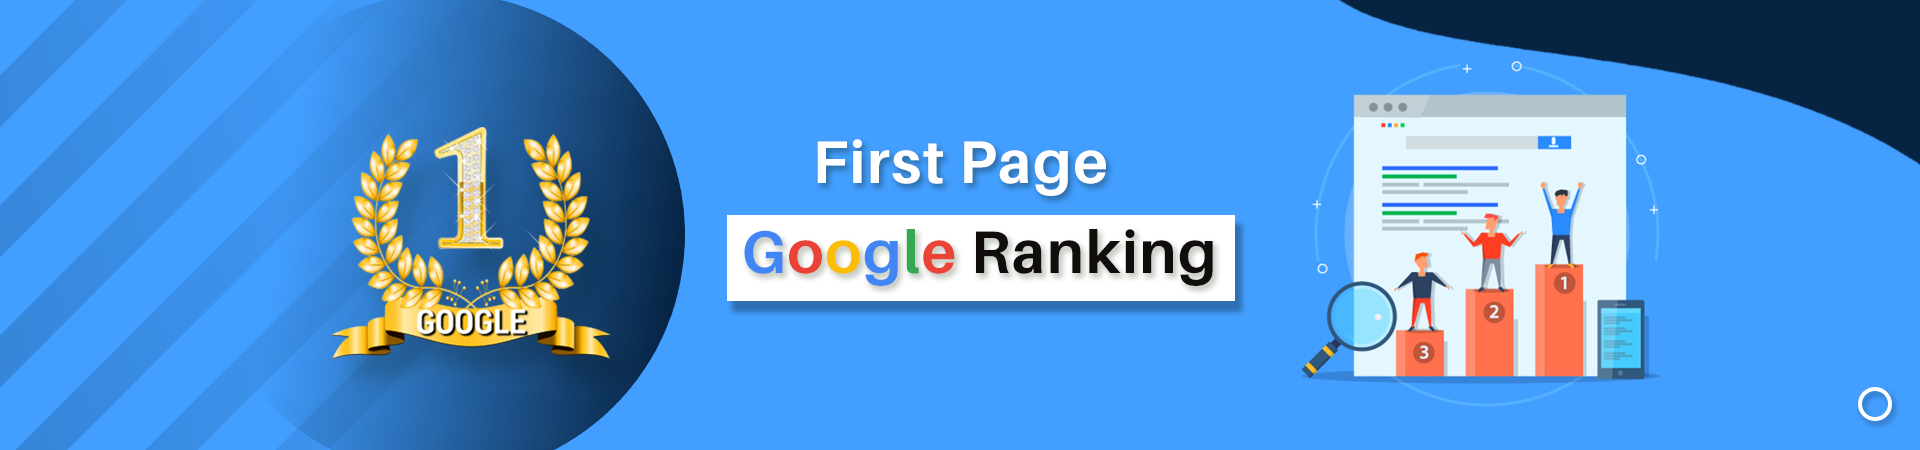 First Page Google Ranking